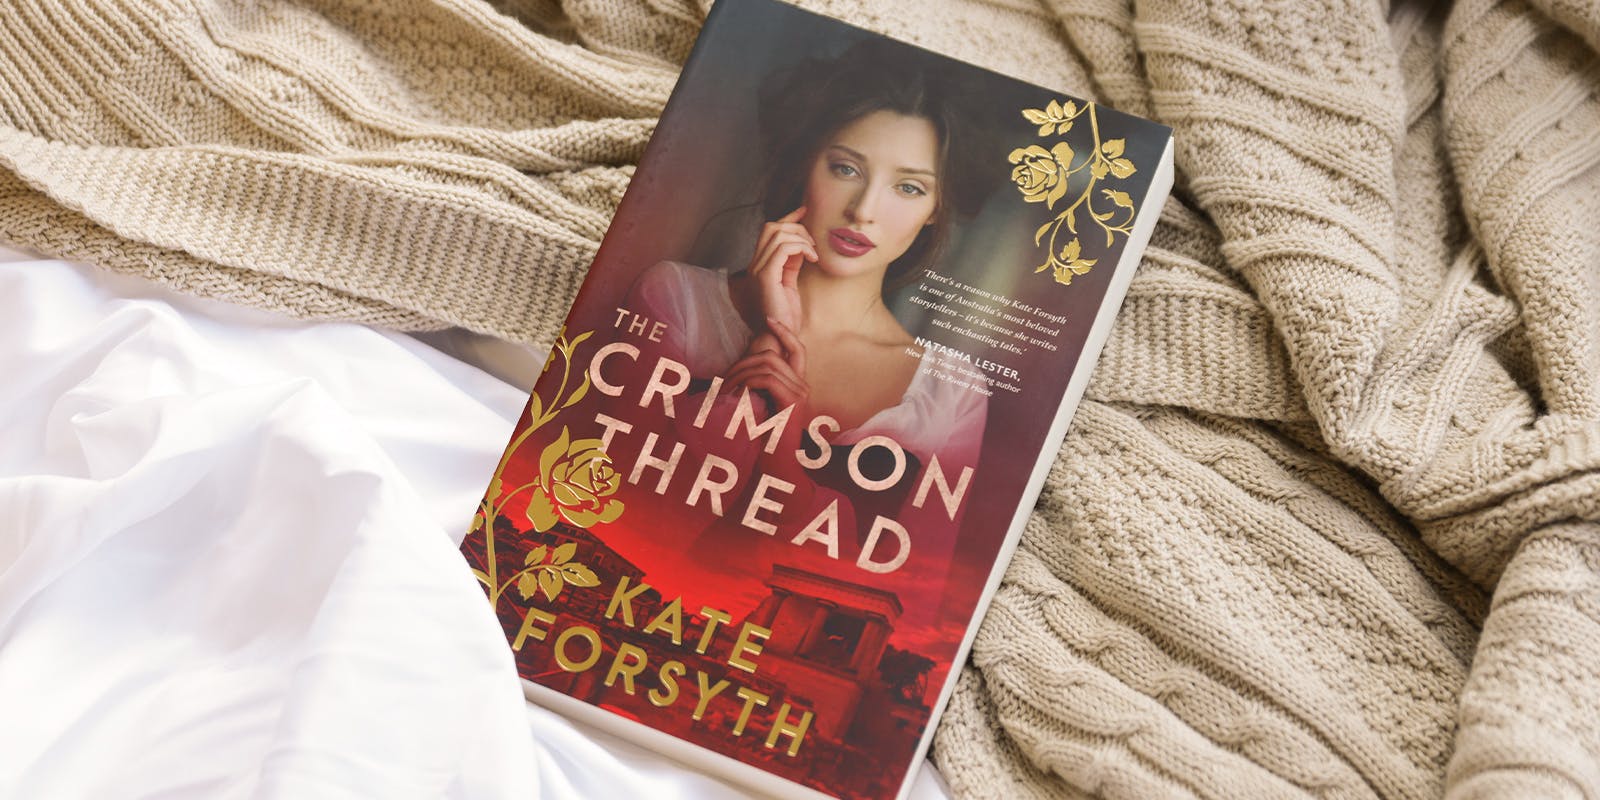 How Kate Forsyth thought to connect history and myth in new novel